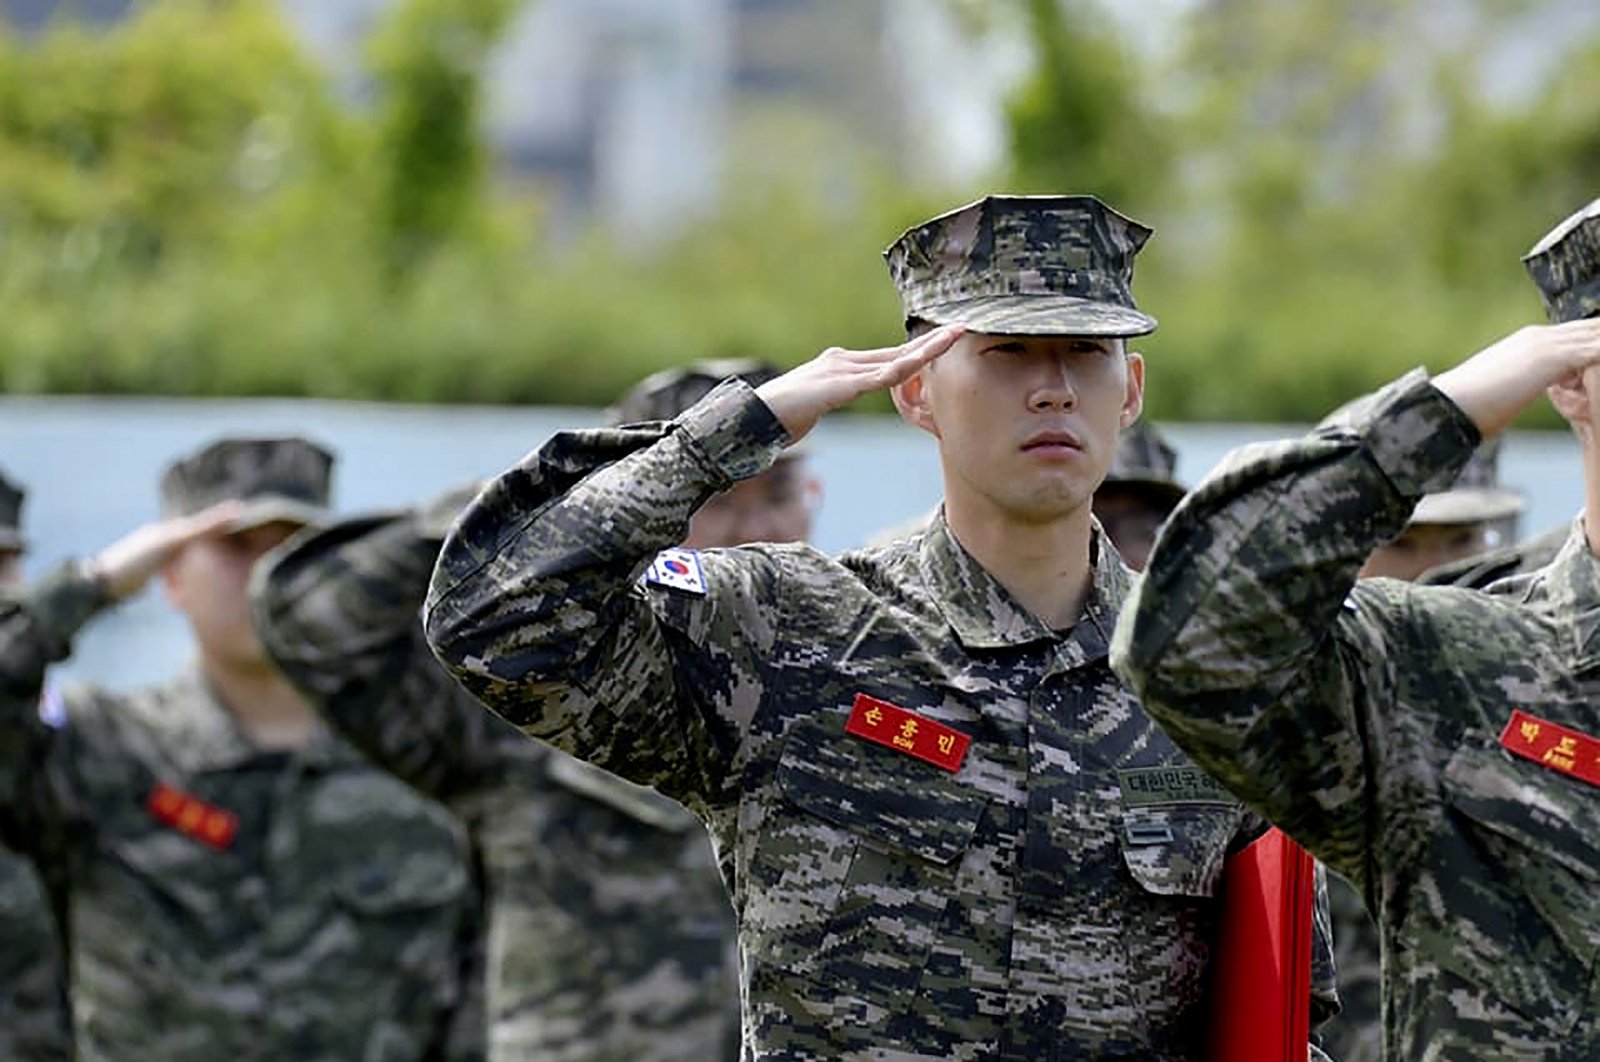 In this photo provided by South Korea Marine Corps' Facebook, Tottenham Hotspur forward Son Heung-min salutes during a basic military training completion ceremony at a Marine Corps boot camp in Seogwipo on Jeju Island, South Korea, Friday, May 8, 2020. (South Korea Marine Corps' Facebook via AP)